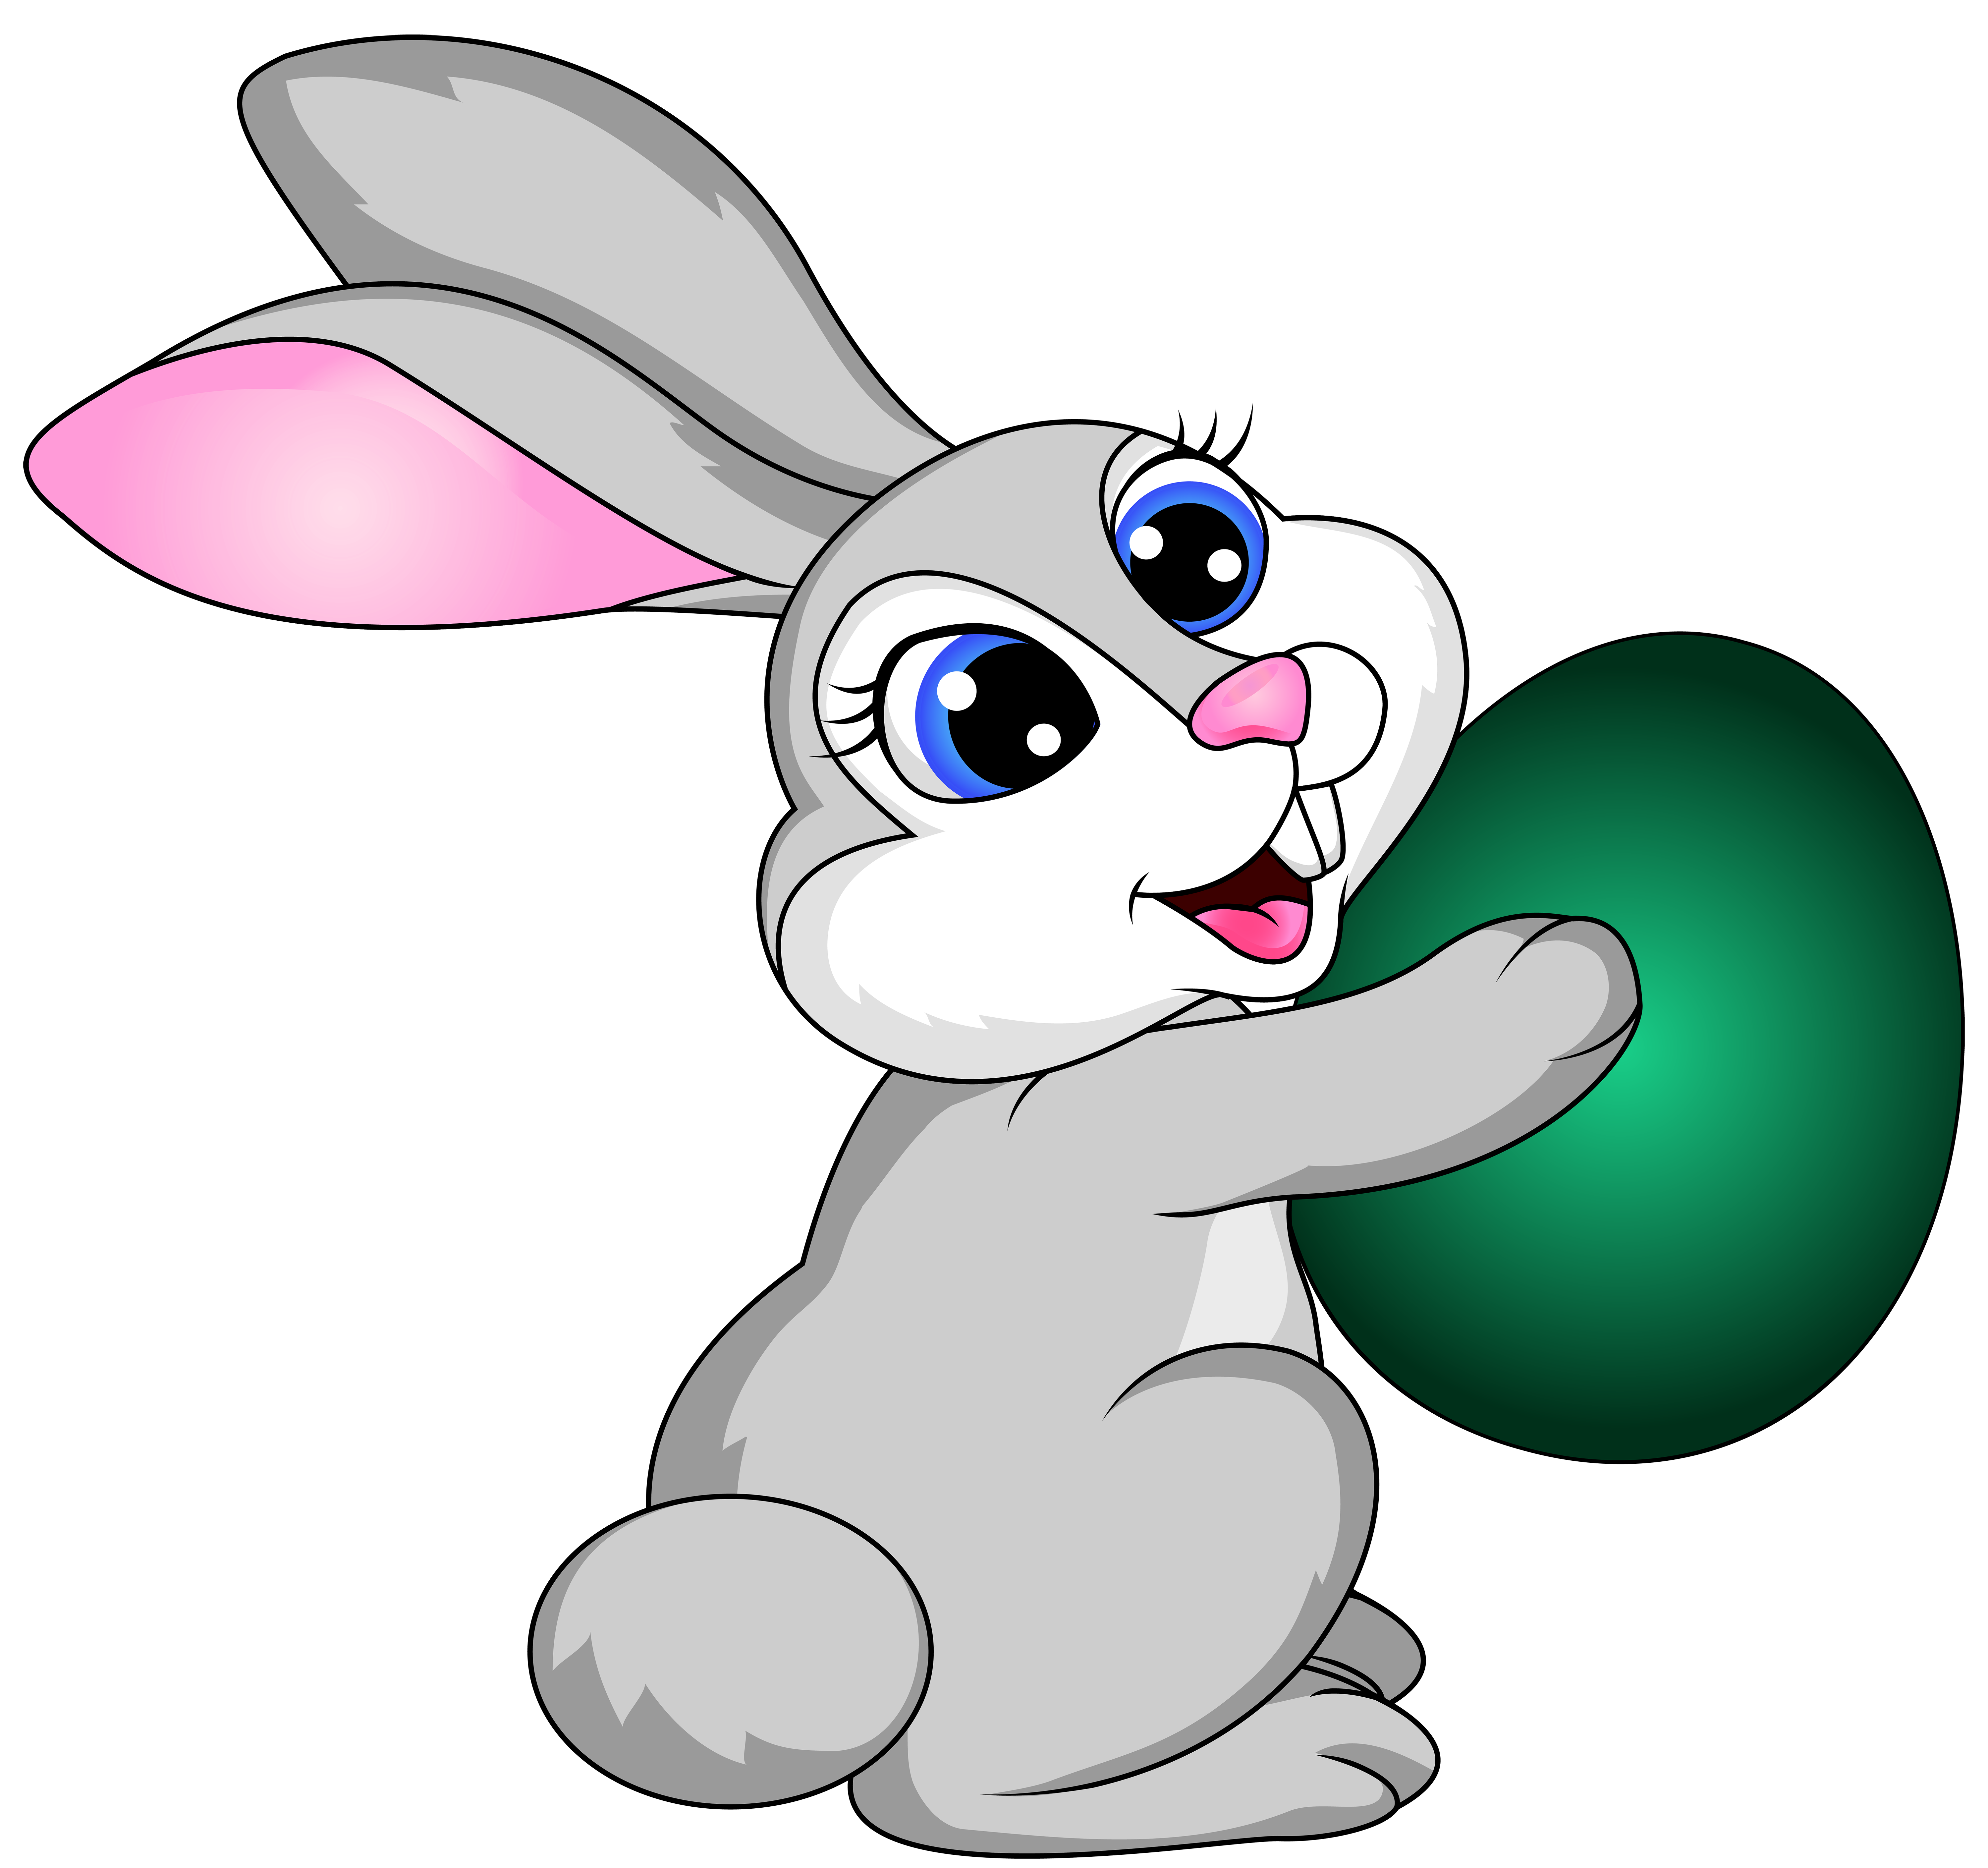 Easter Bunny with Egg Transparent PNG Clip Art Image | Gallery ...